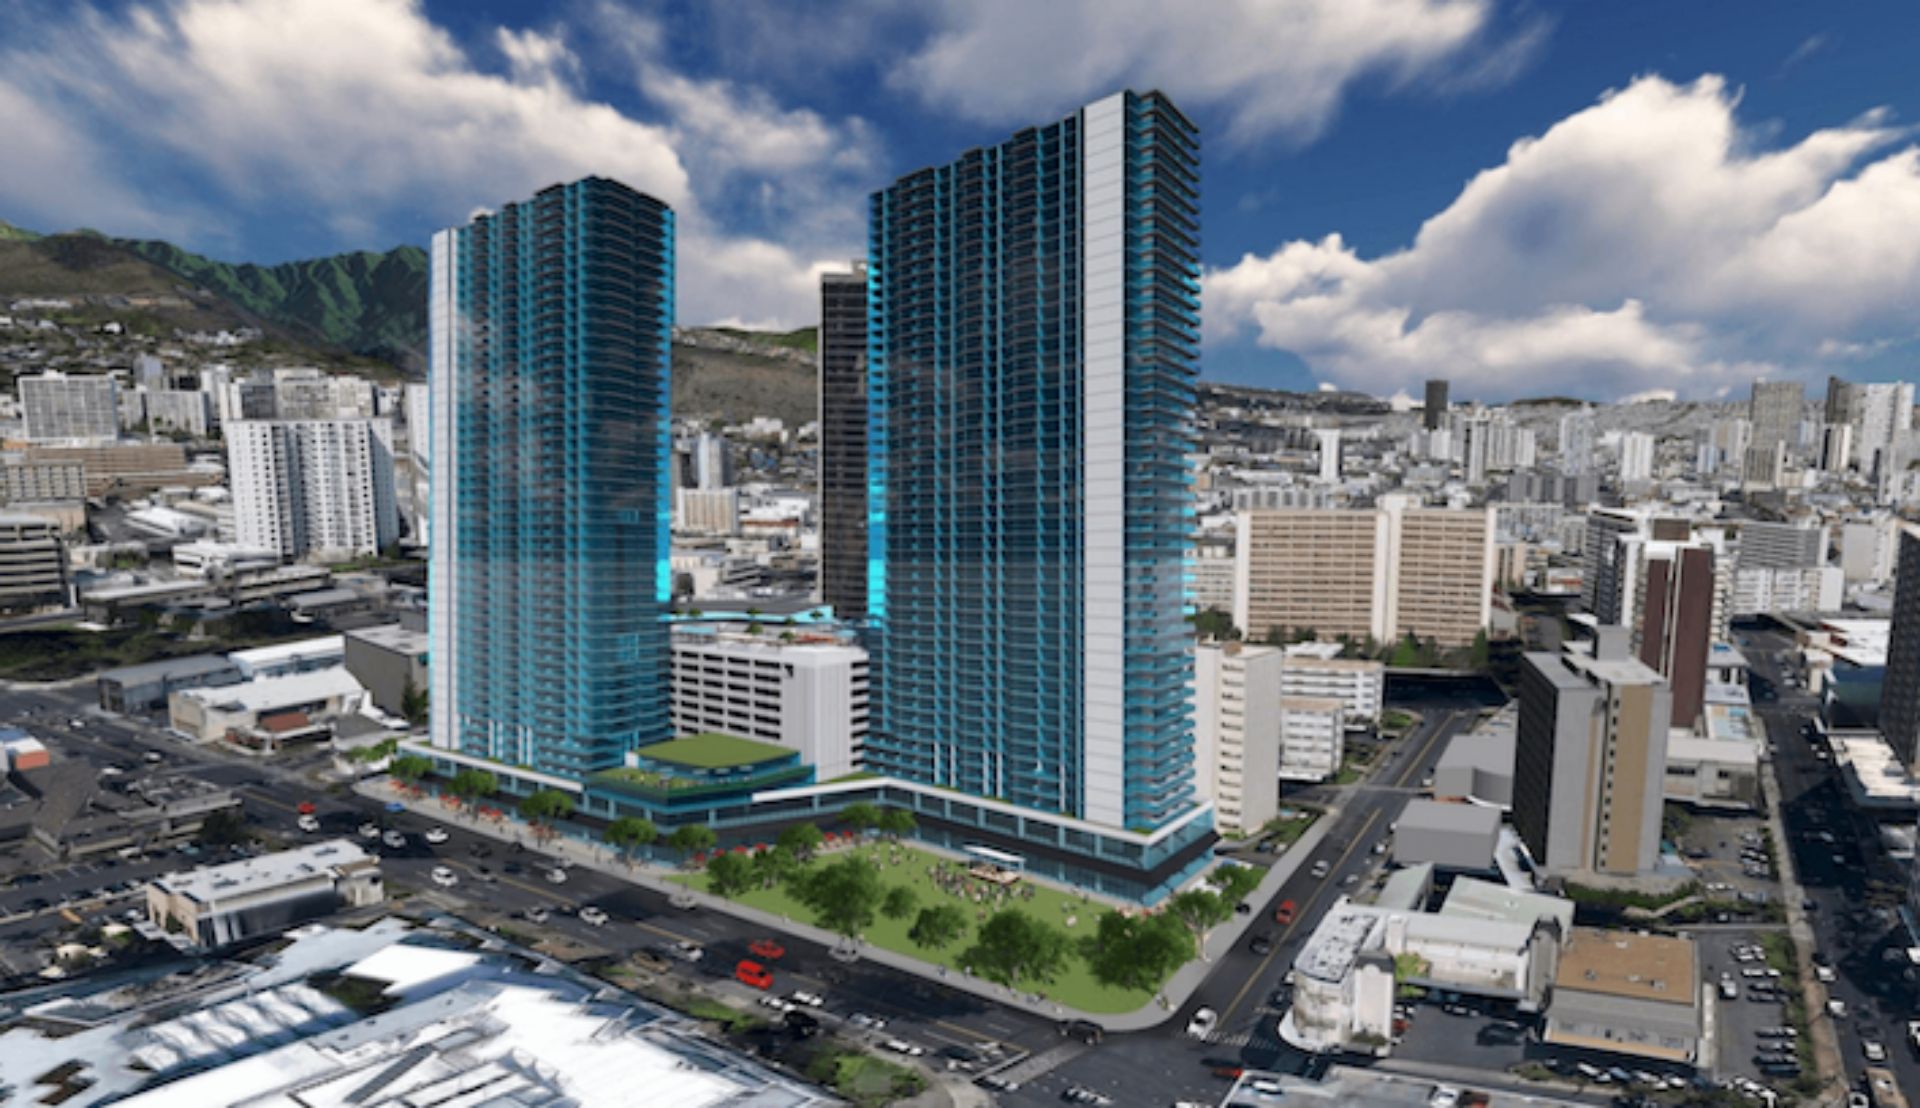 keeaumoku towers artist rendering of proposed condo towers